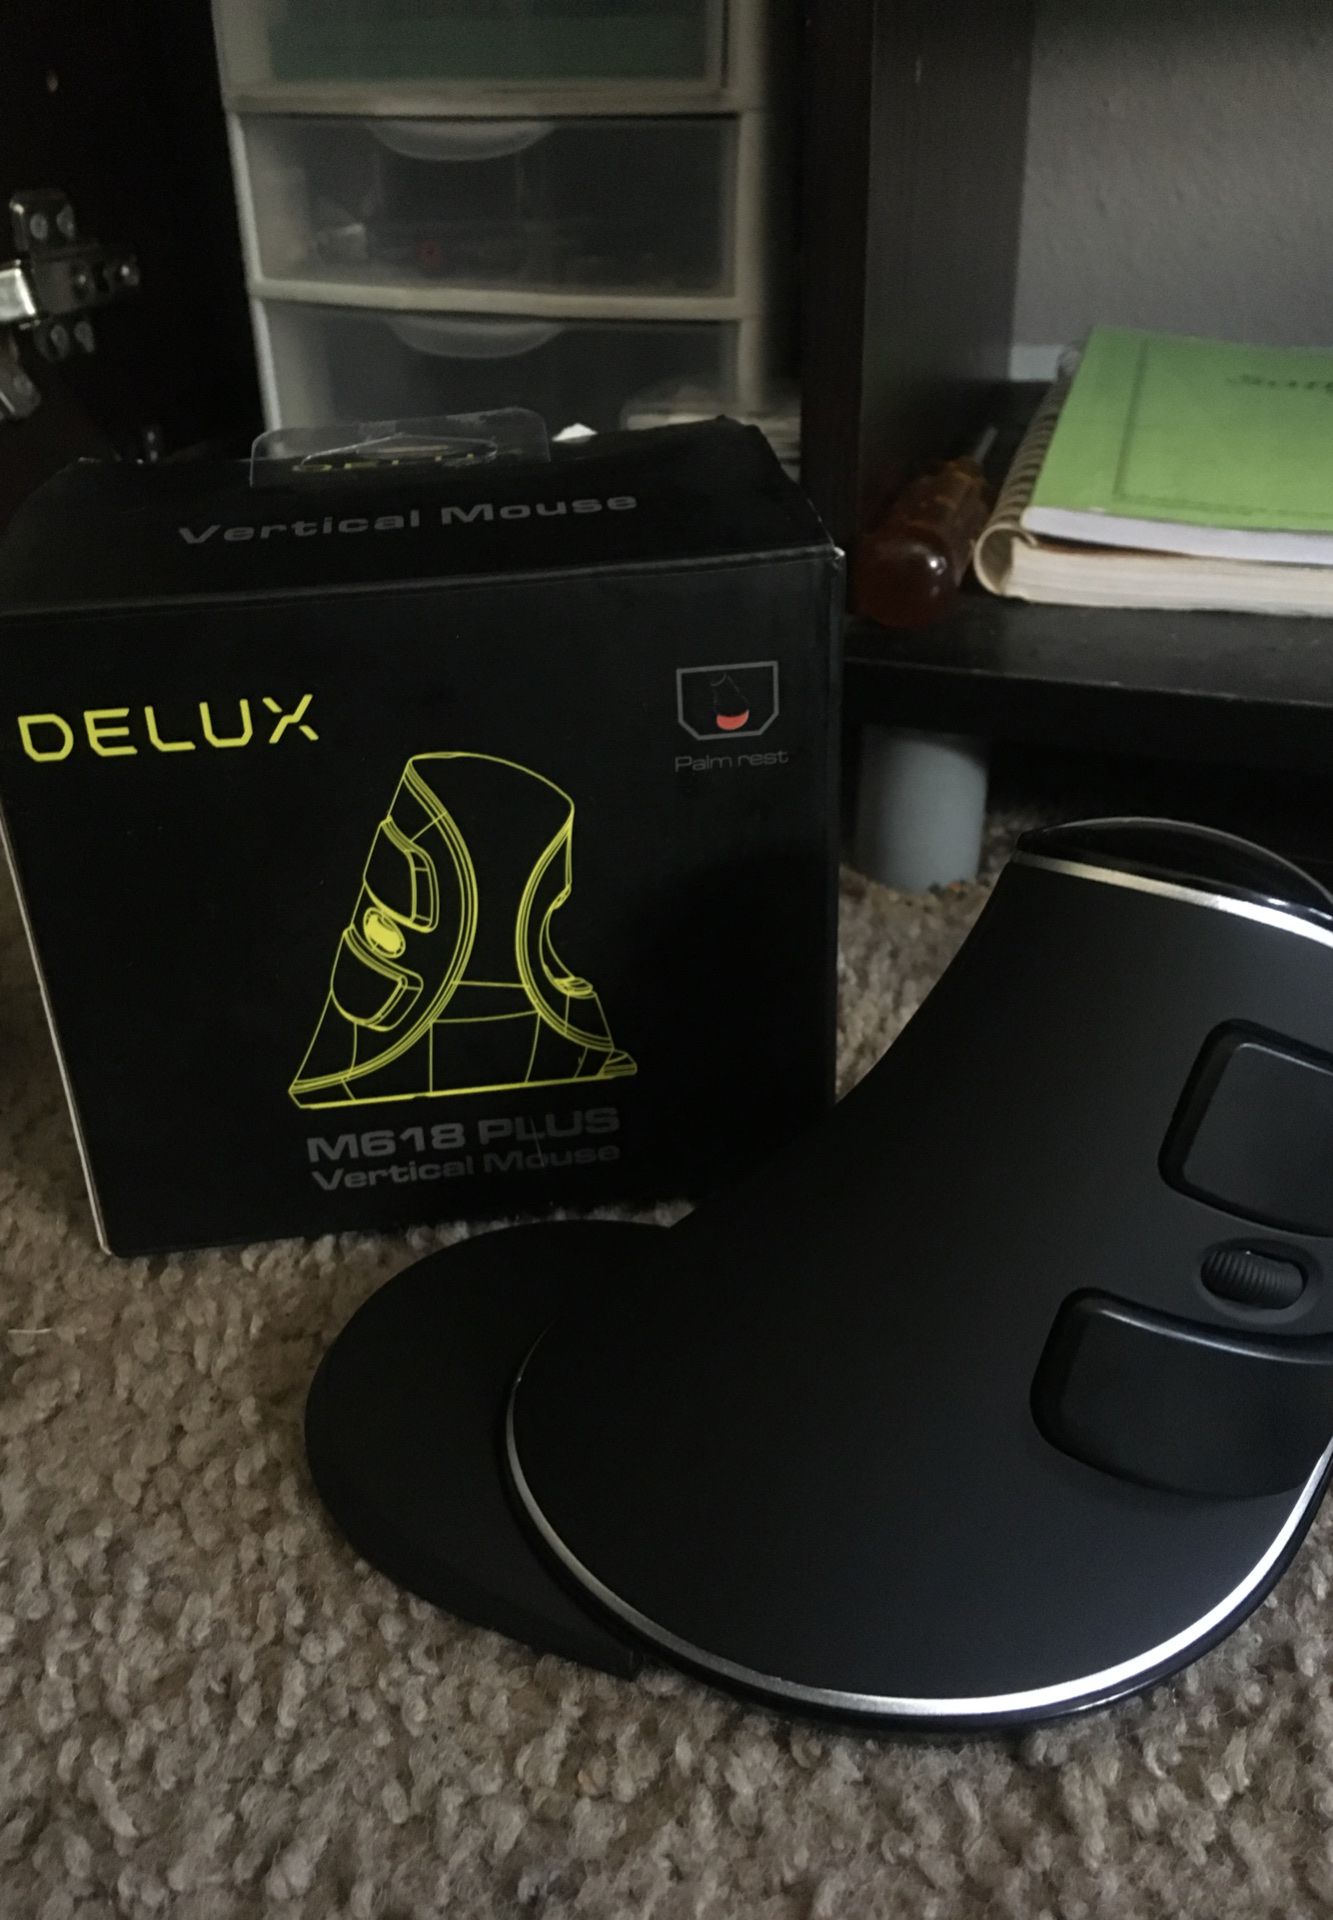 Vertical gaming mouse (Delux)